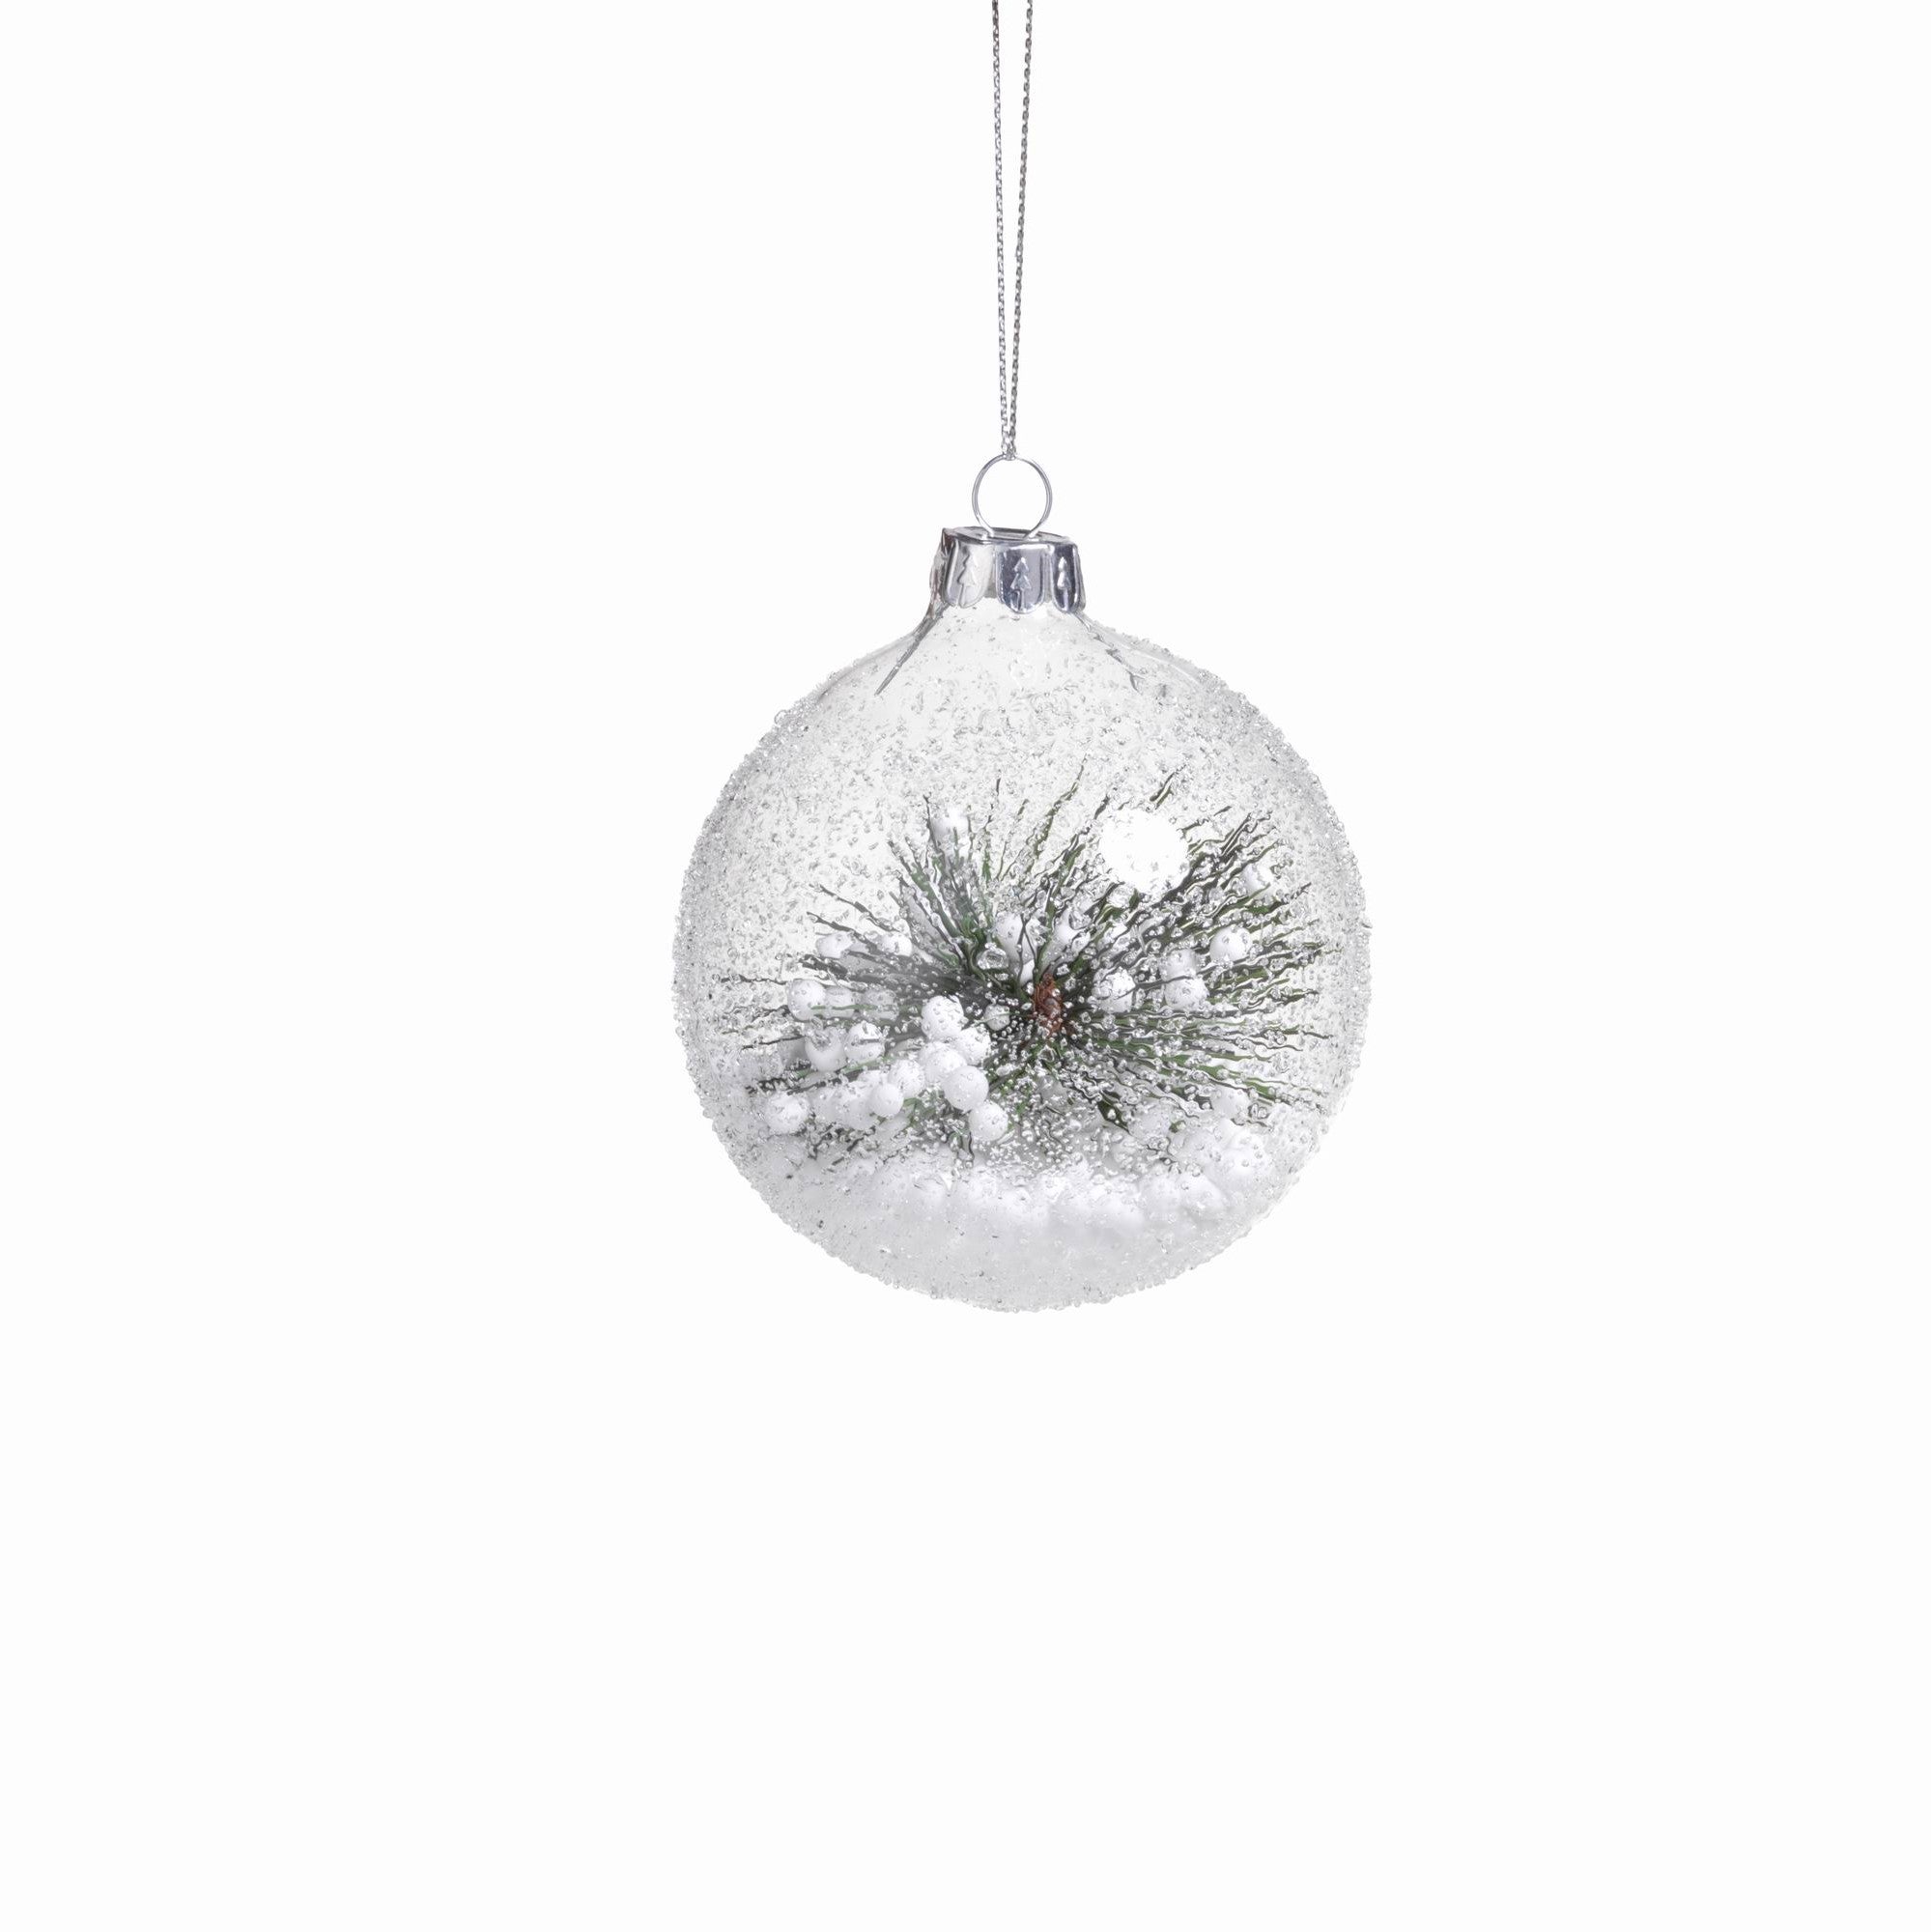 Clear Beaded Round Ornament w/ Pine Needle - CARLYLE AVENUE